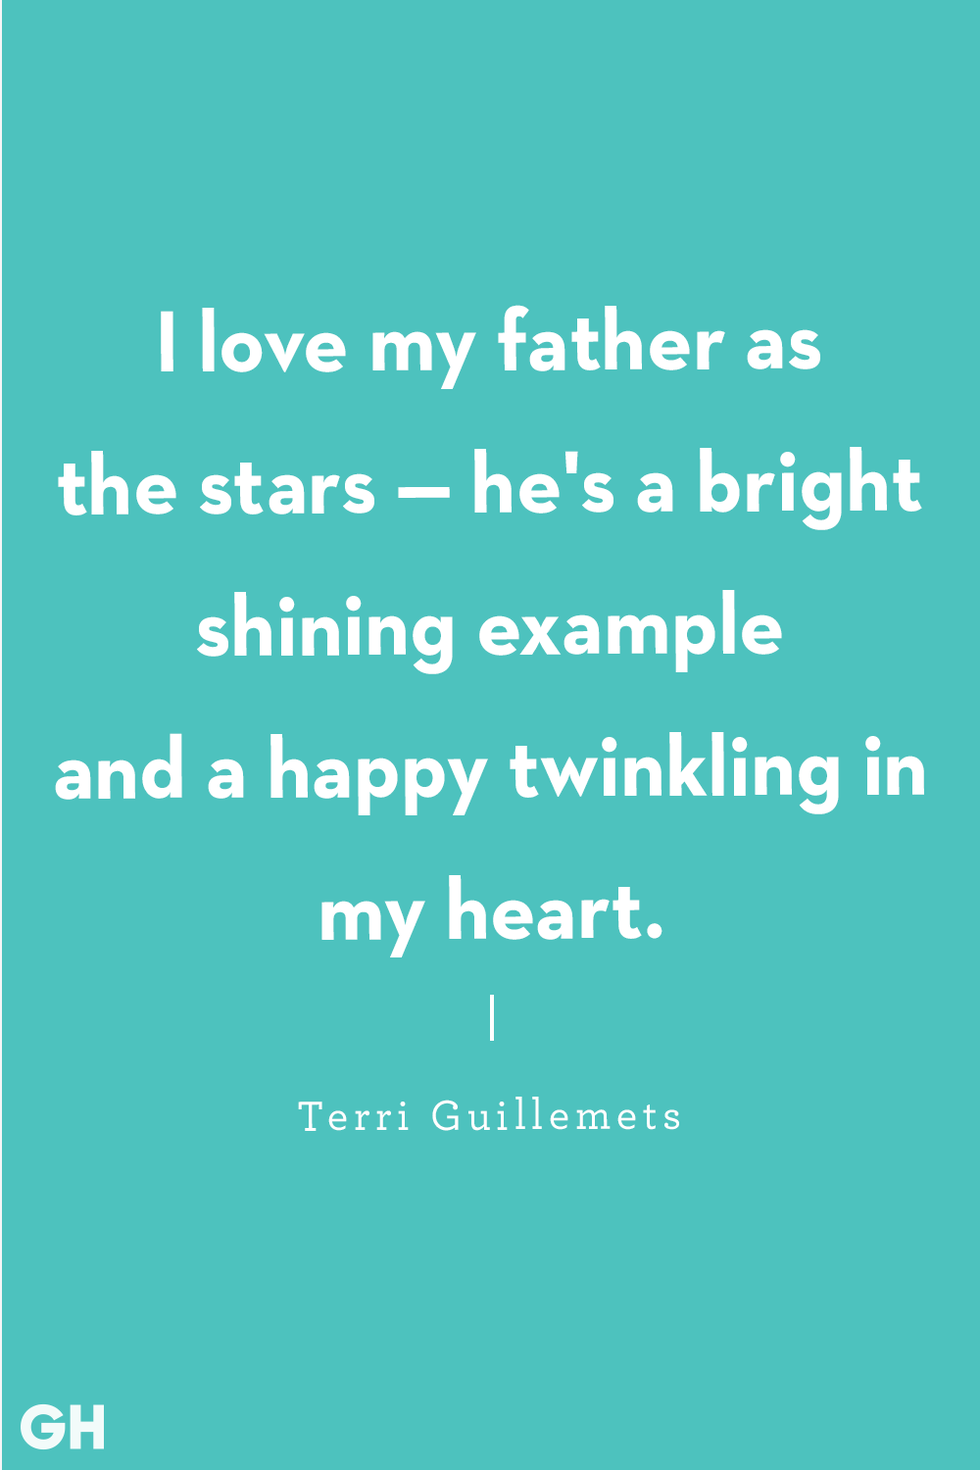 25 Heart Touching Father's Day Quotes For Your Beloved Dad